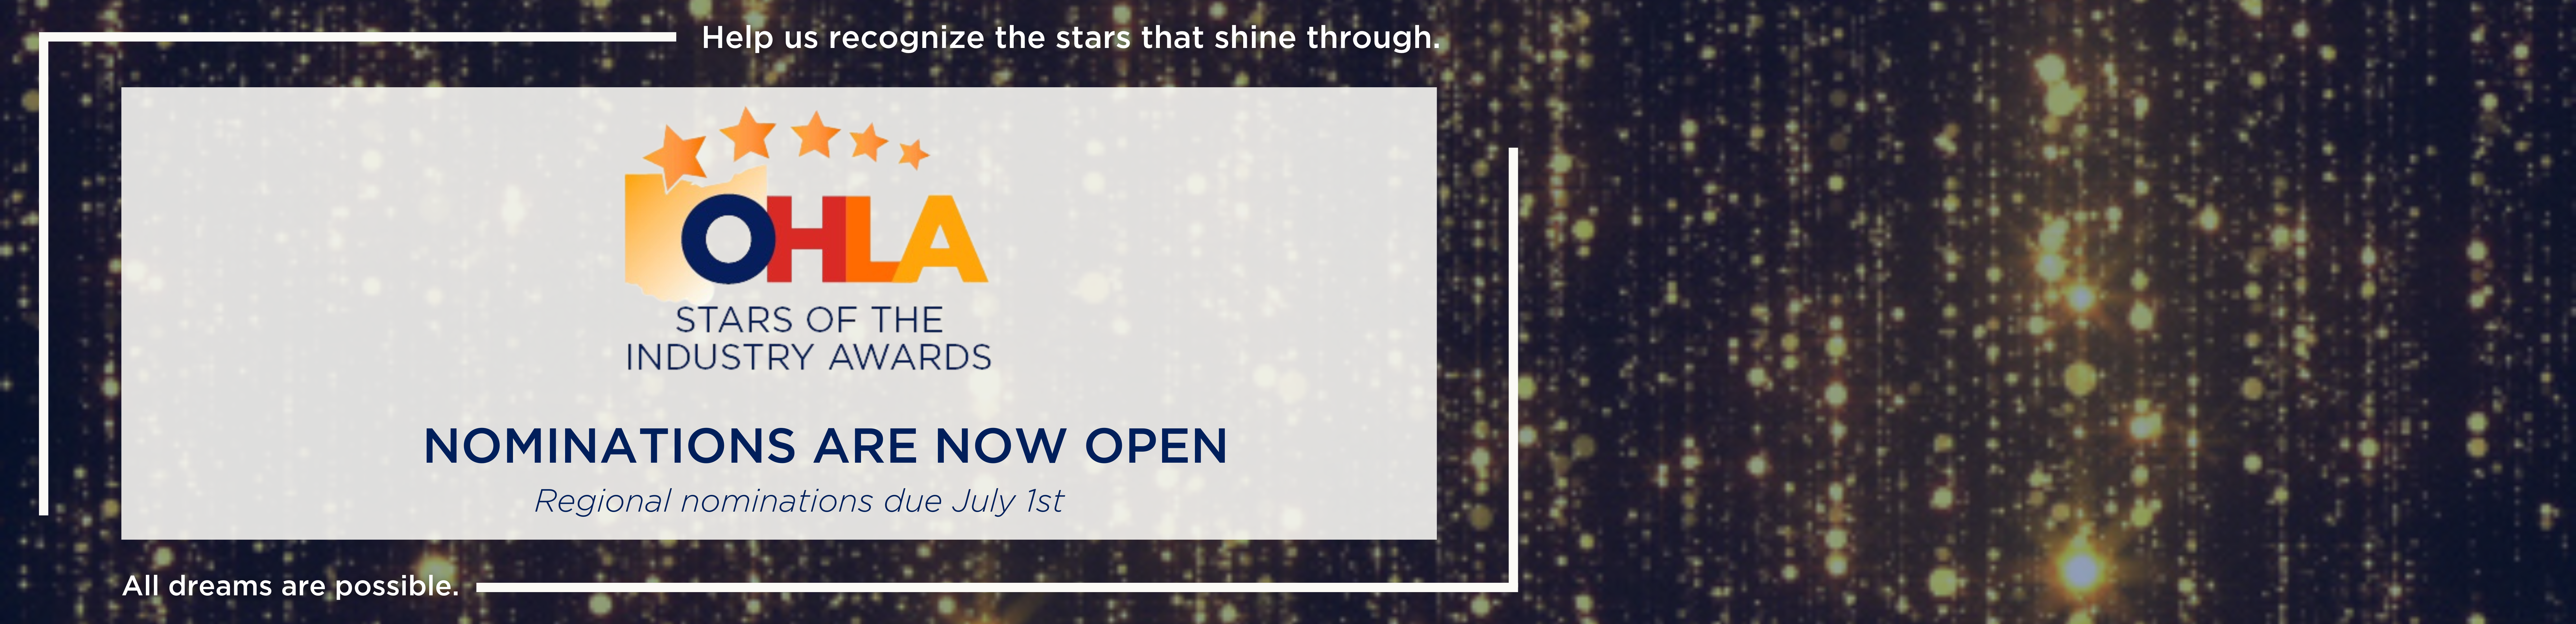 Stars Nominations Now Open